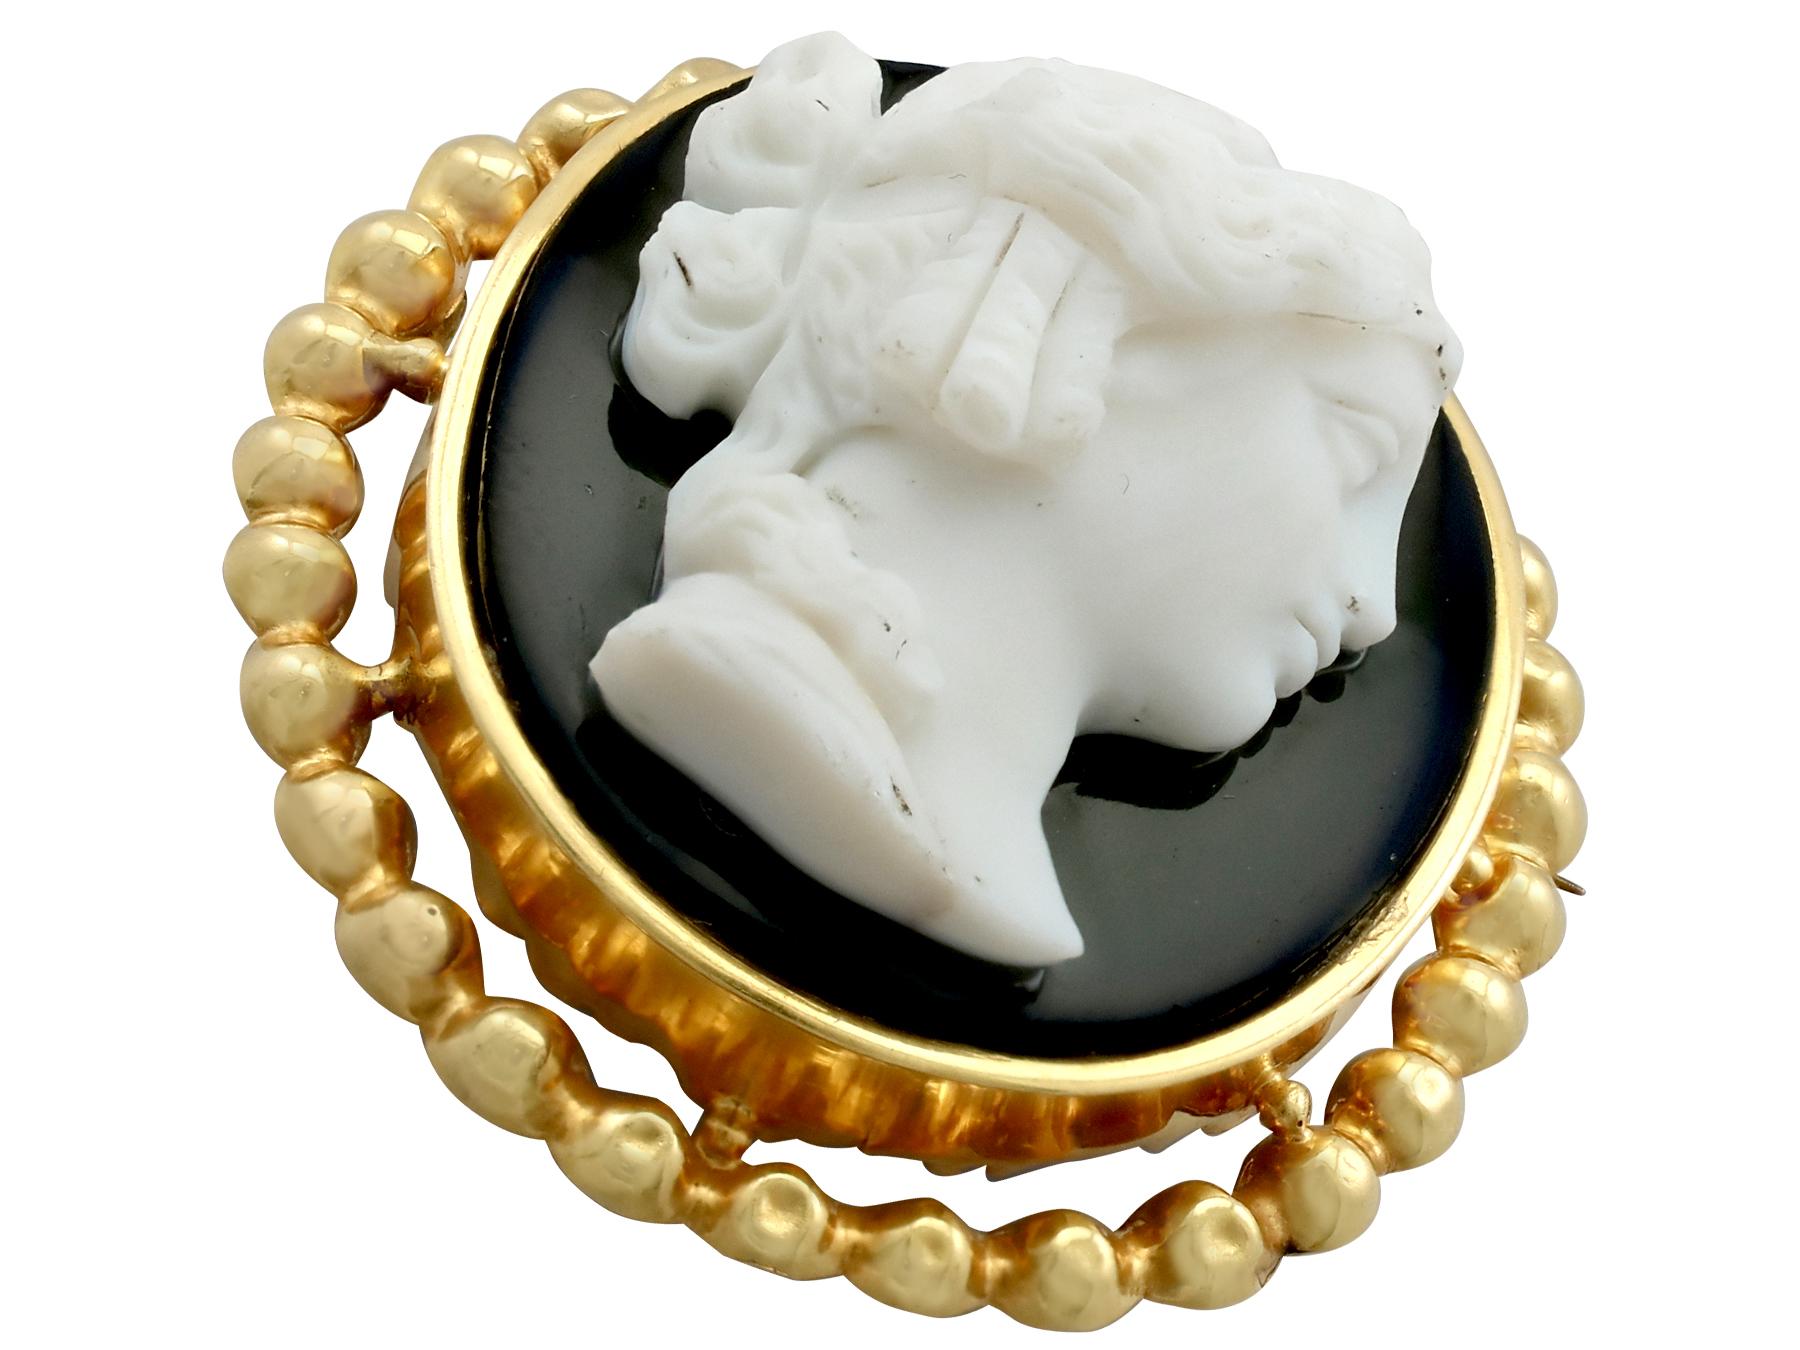 Antique French Cameo Brooch or Pendant in Yellow Gold, circa 1880 In Excellent Condition For Sale In Jesmond, Newcastle Upon Tyne